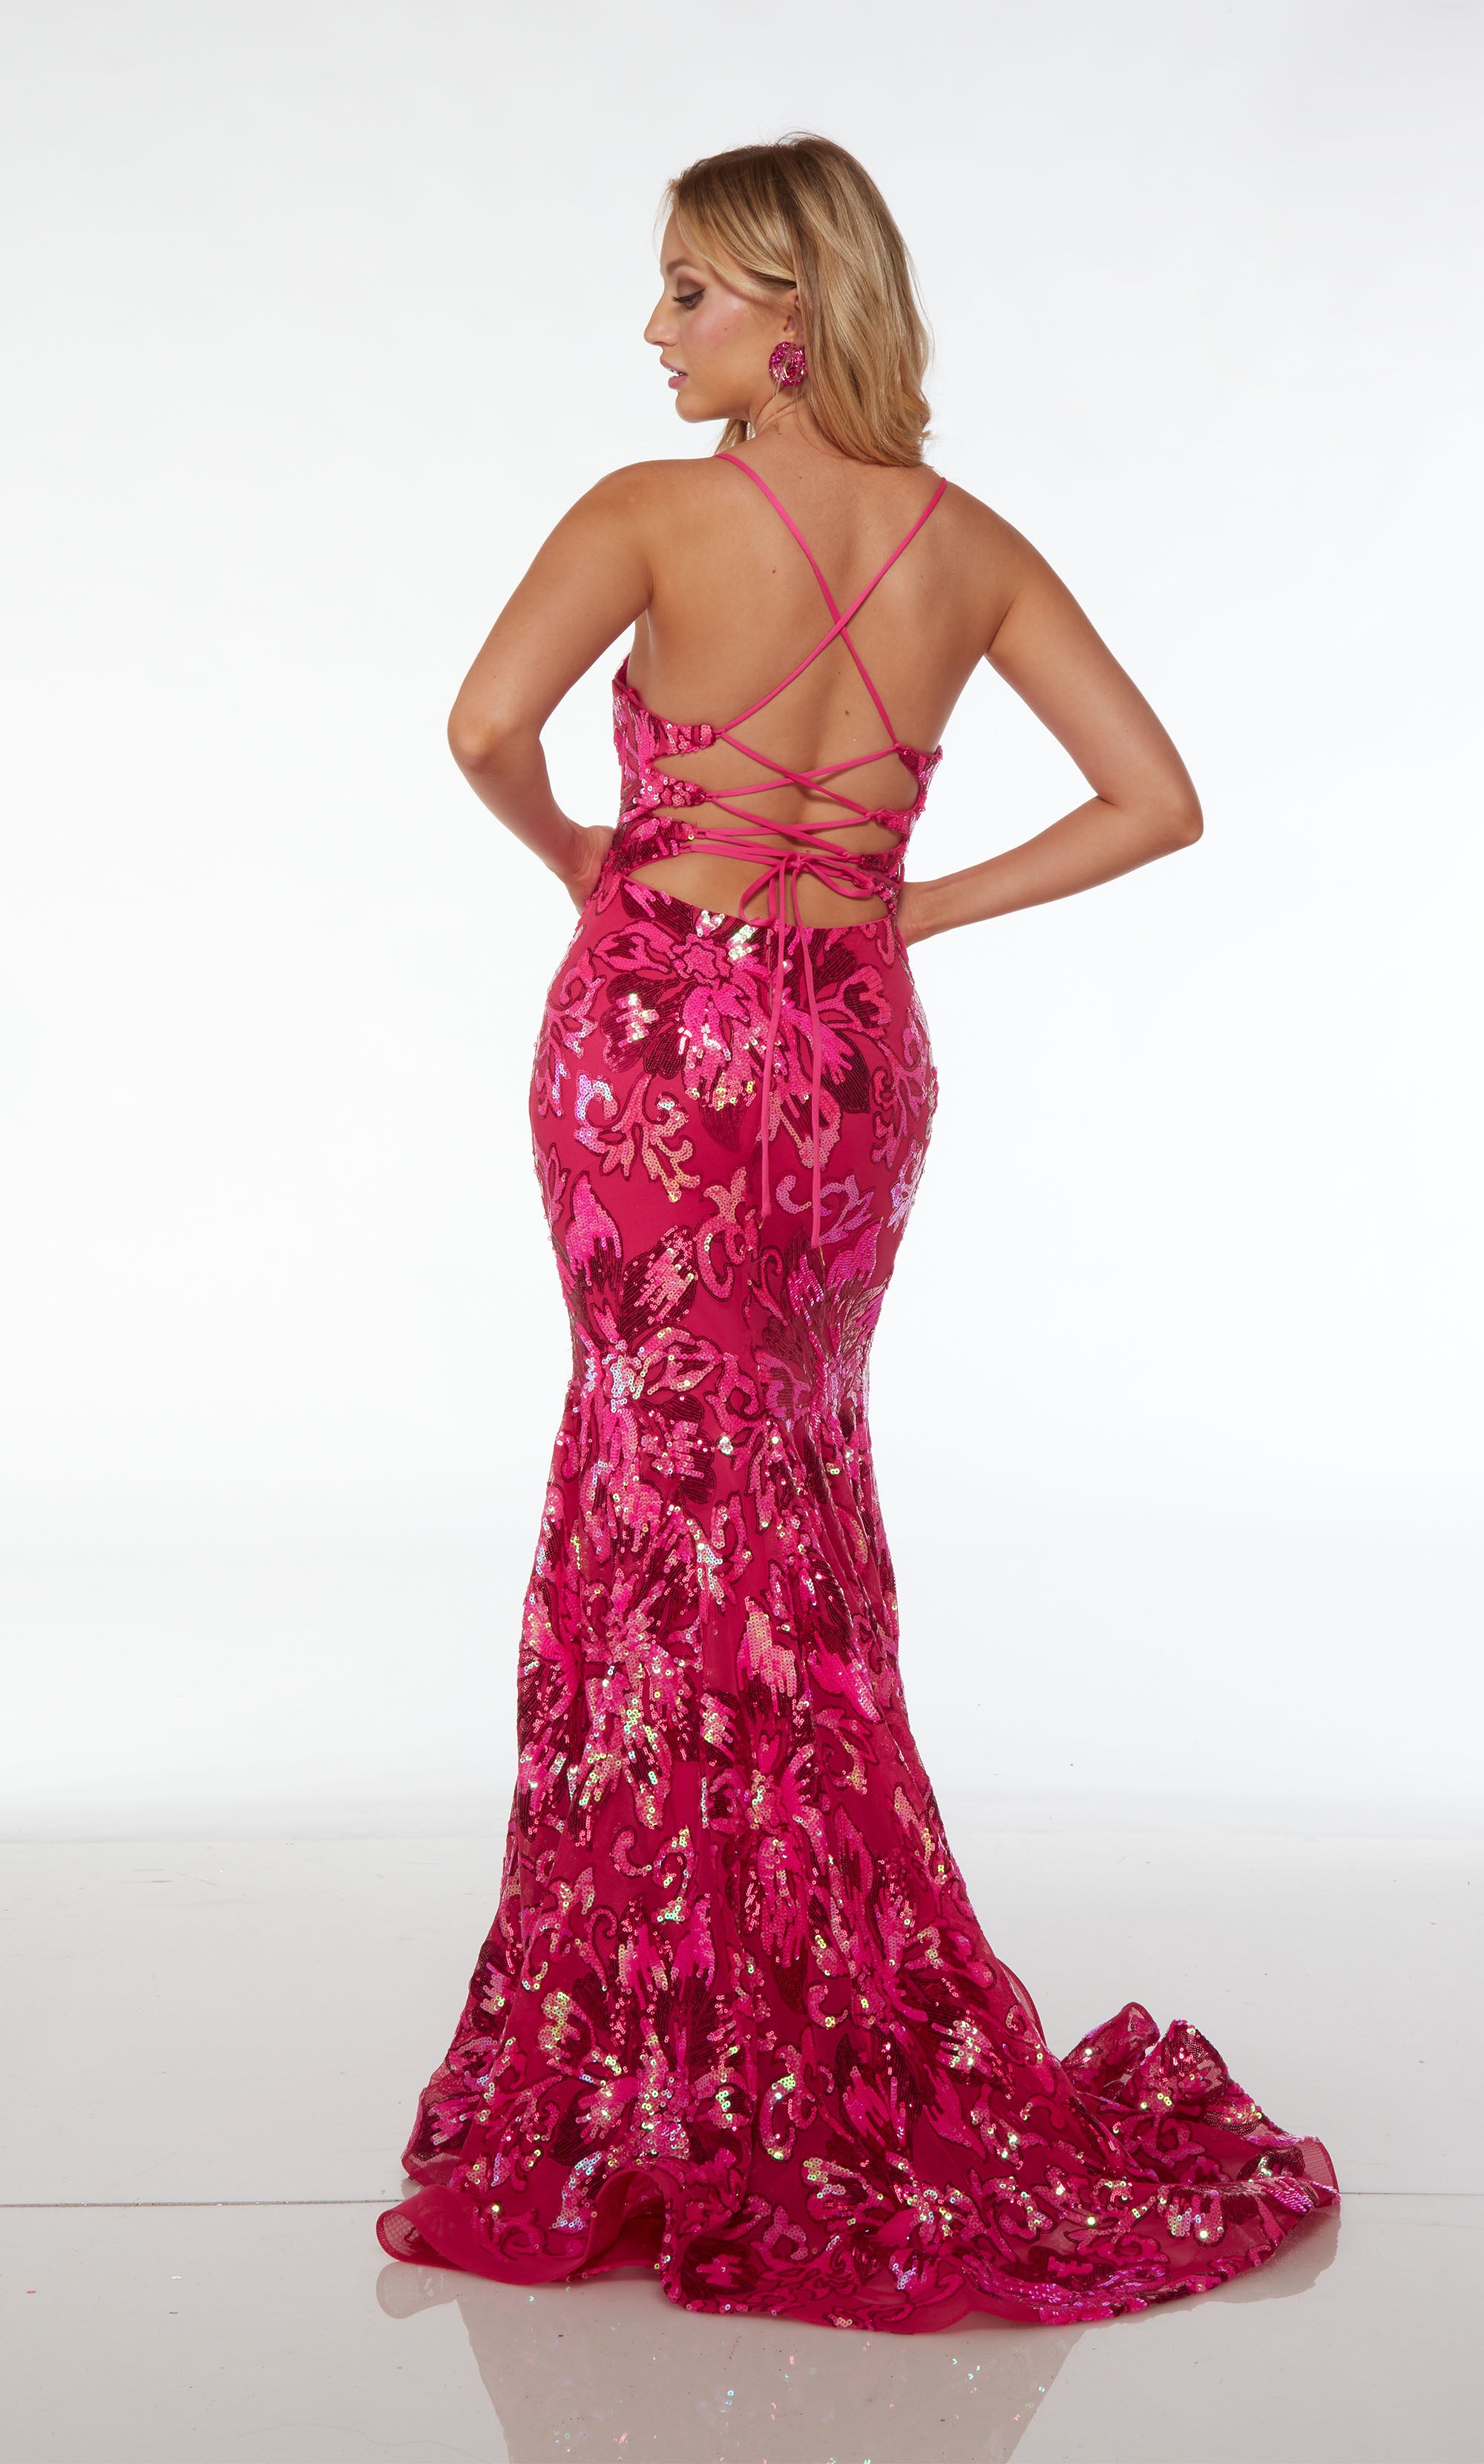 Captivating pink mermaid dress adorned with an floral sequin design, plunging neckline, strappy lace-up back, and an stylish train for an glamorous look.